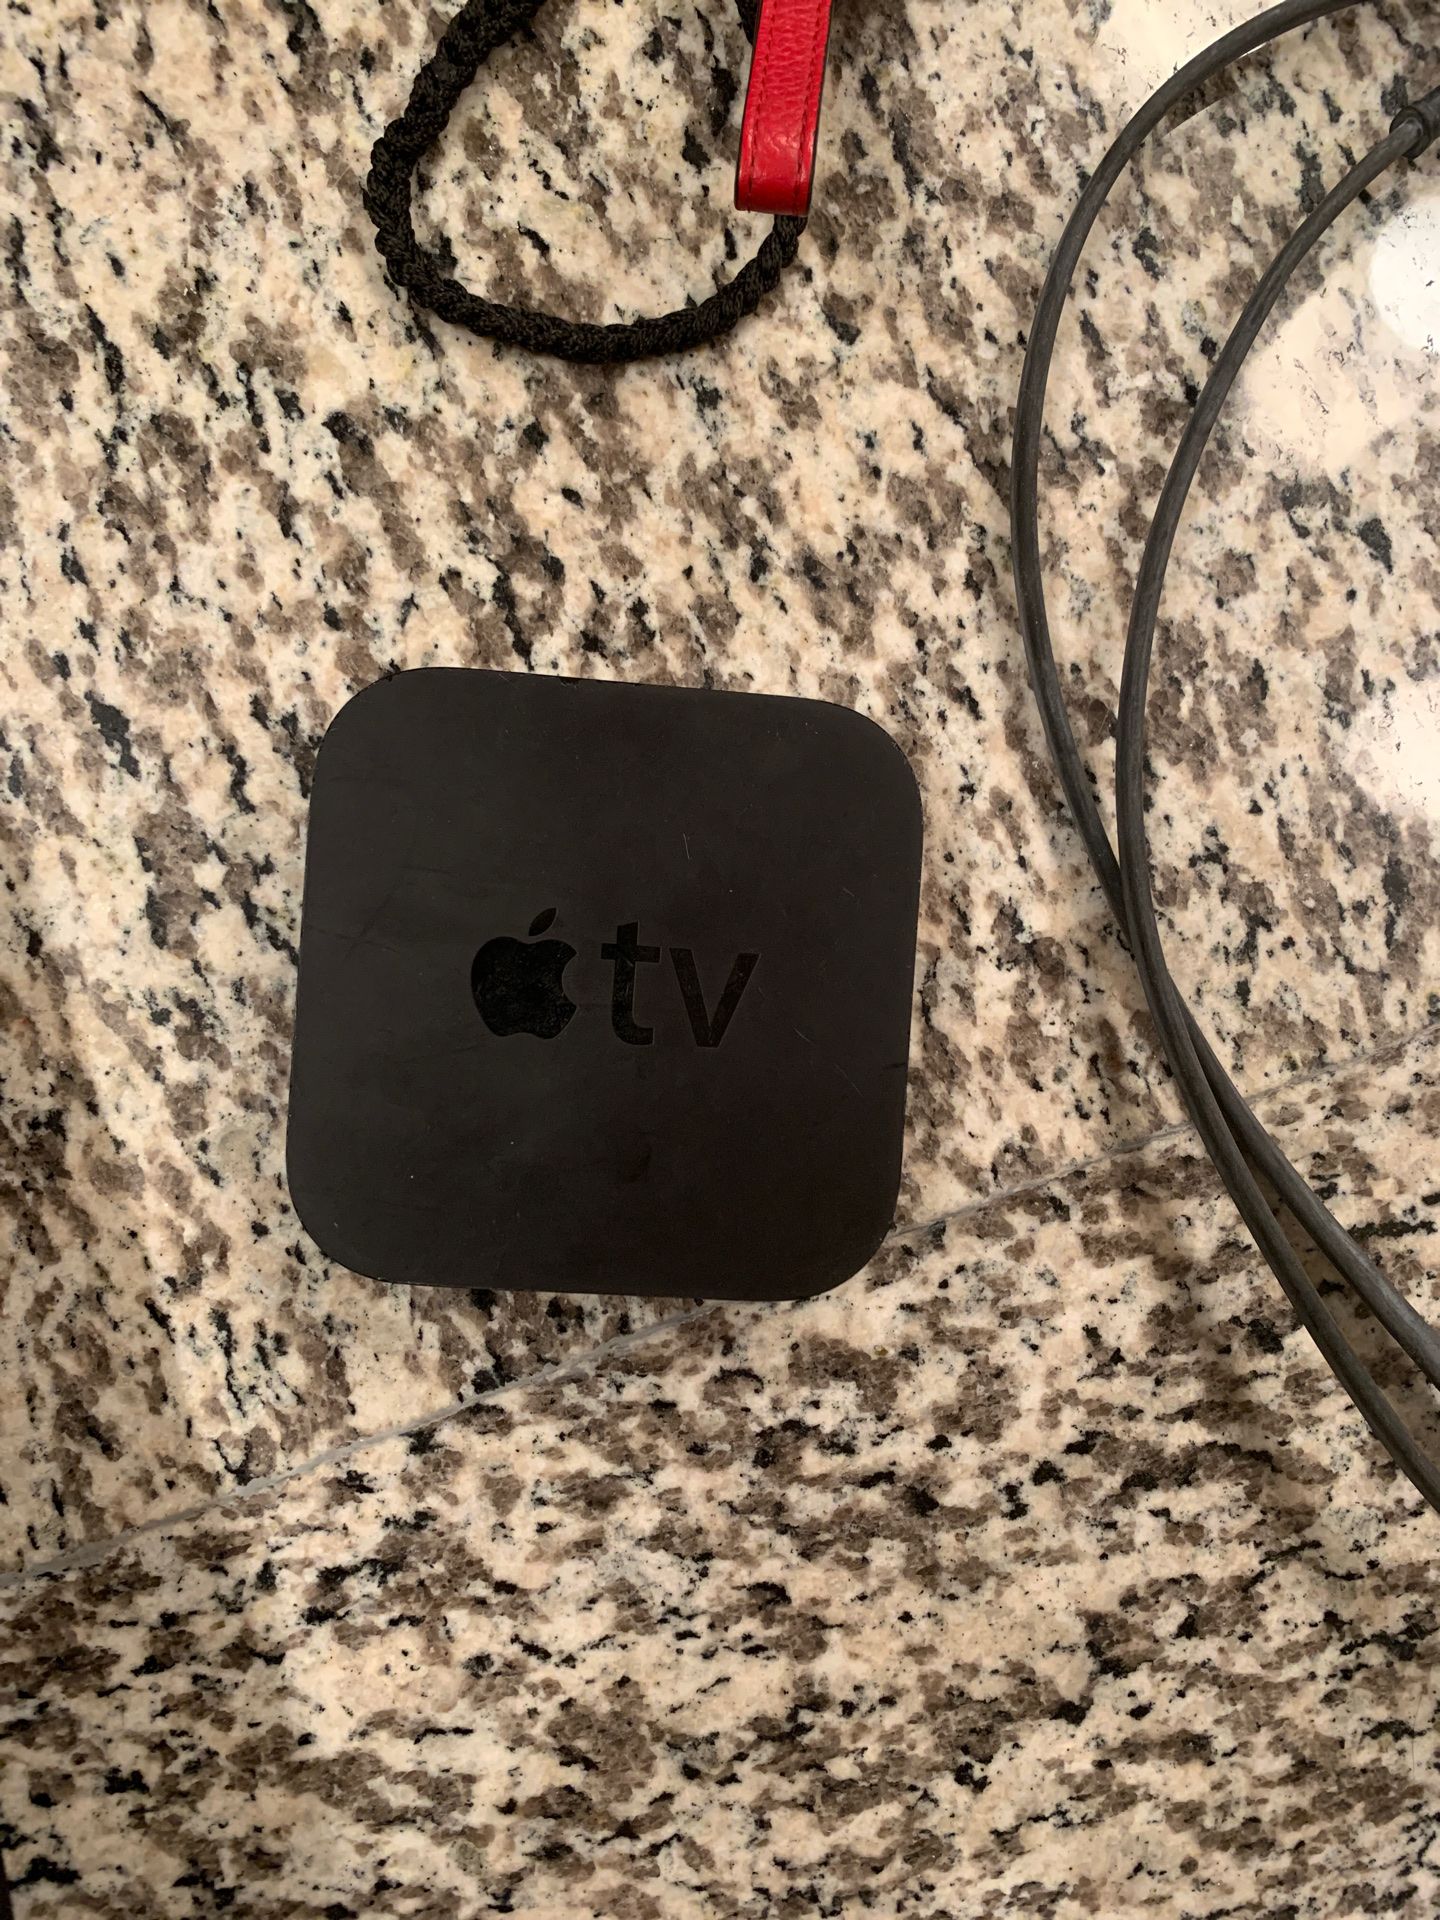 Apple TV 3rd gen $45 comes with cords